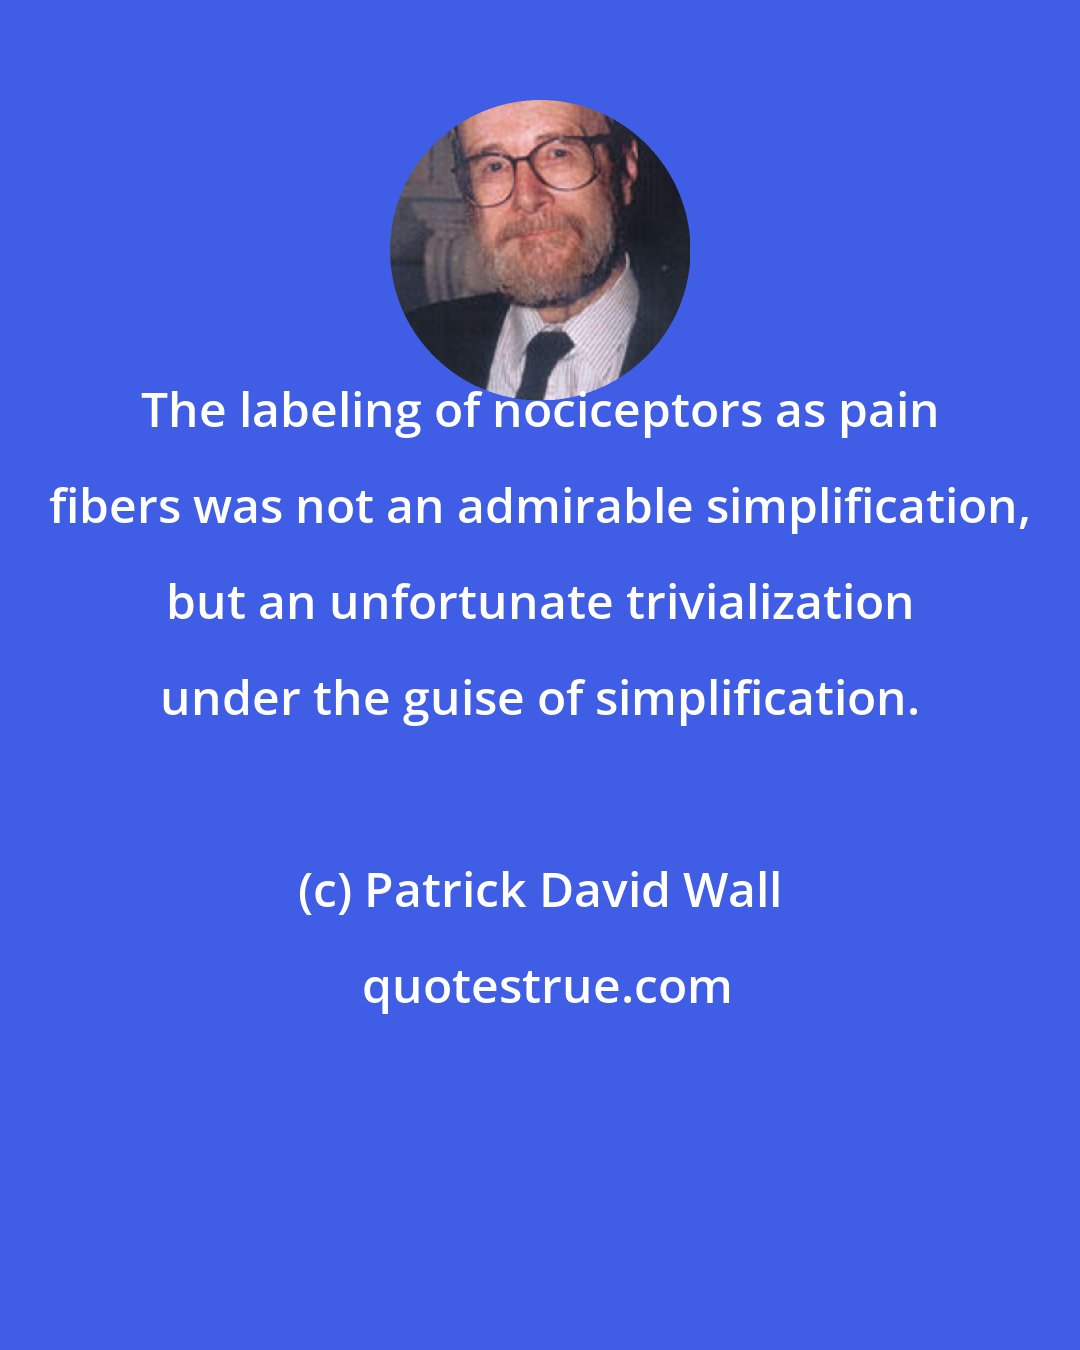 Patrick David Wall: The labeling of nociceptors as pain fibers was not an admirable simplification, but an unfortunate trivialization under the guise of simplification.